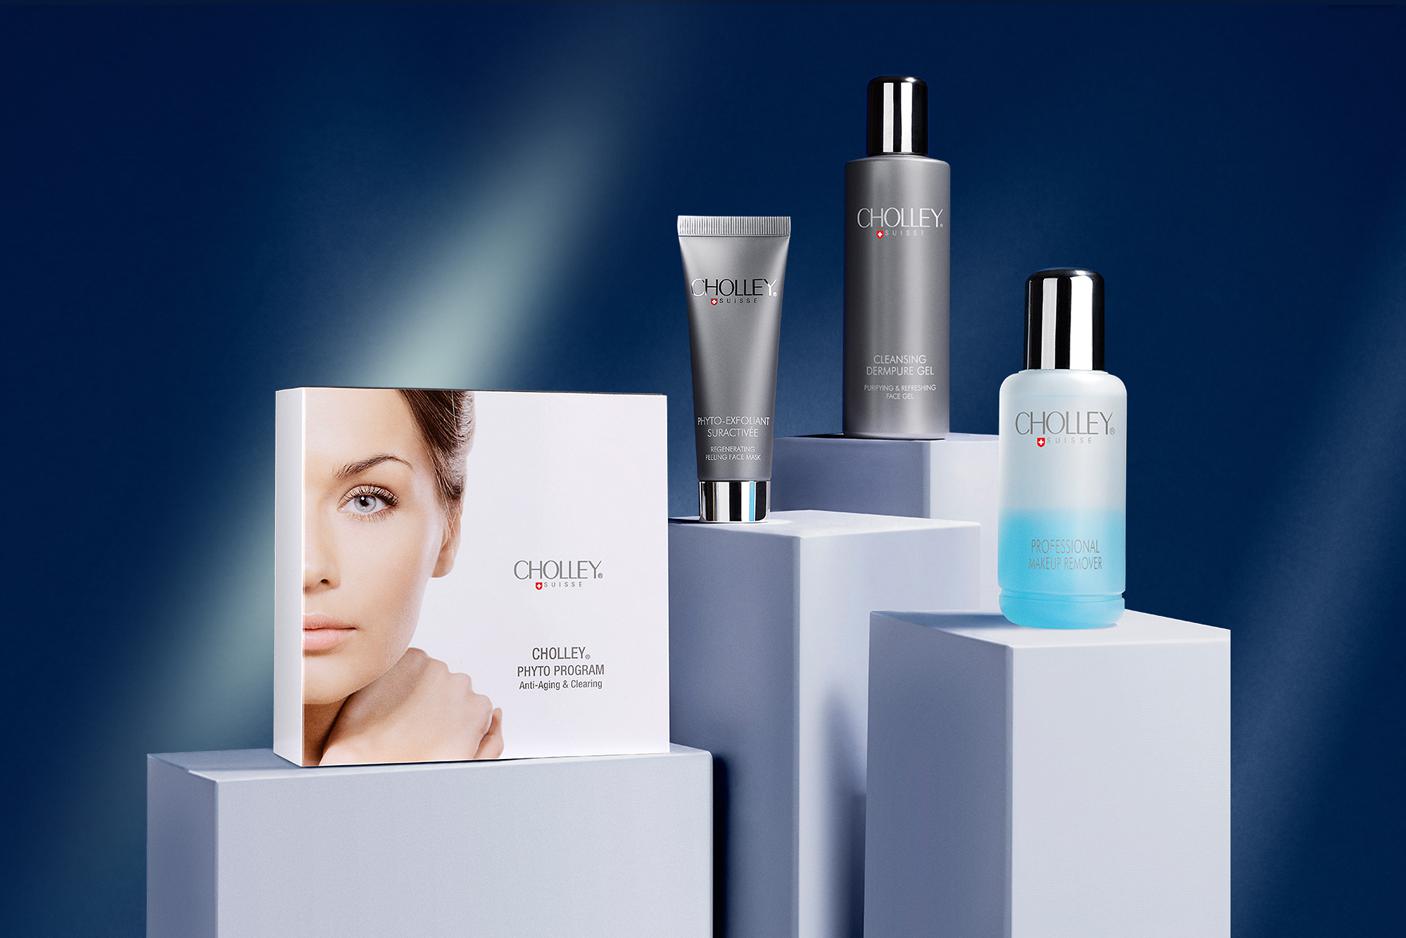 Anti-aging and brightening products Cholley, Cholley